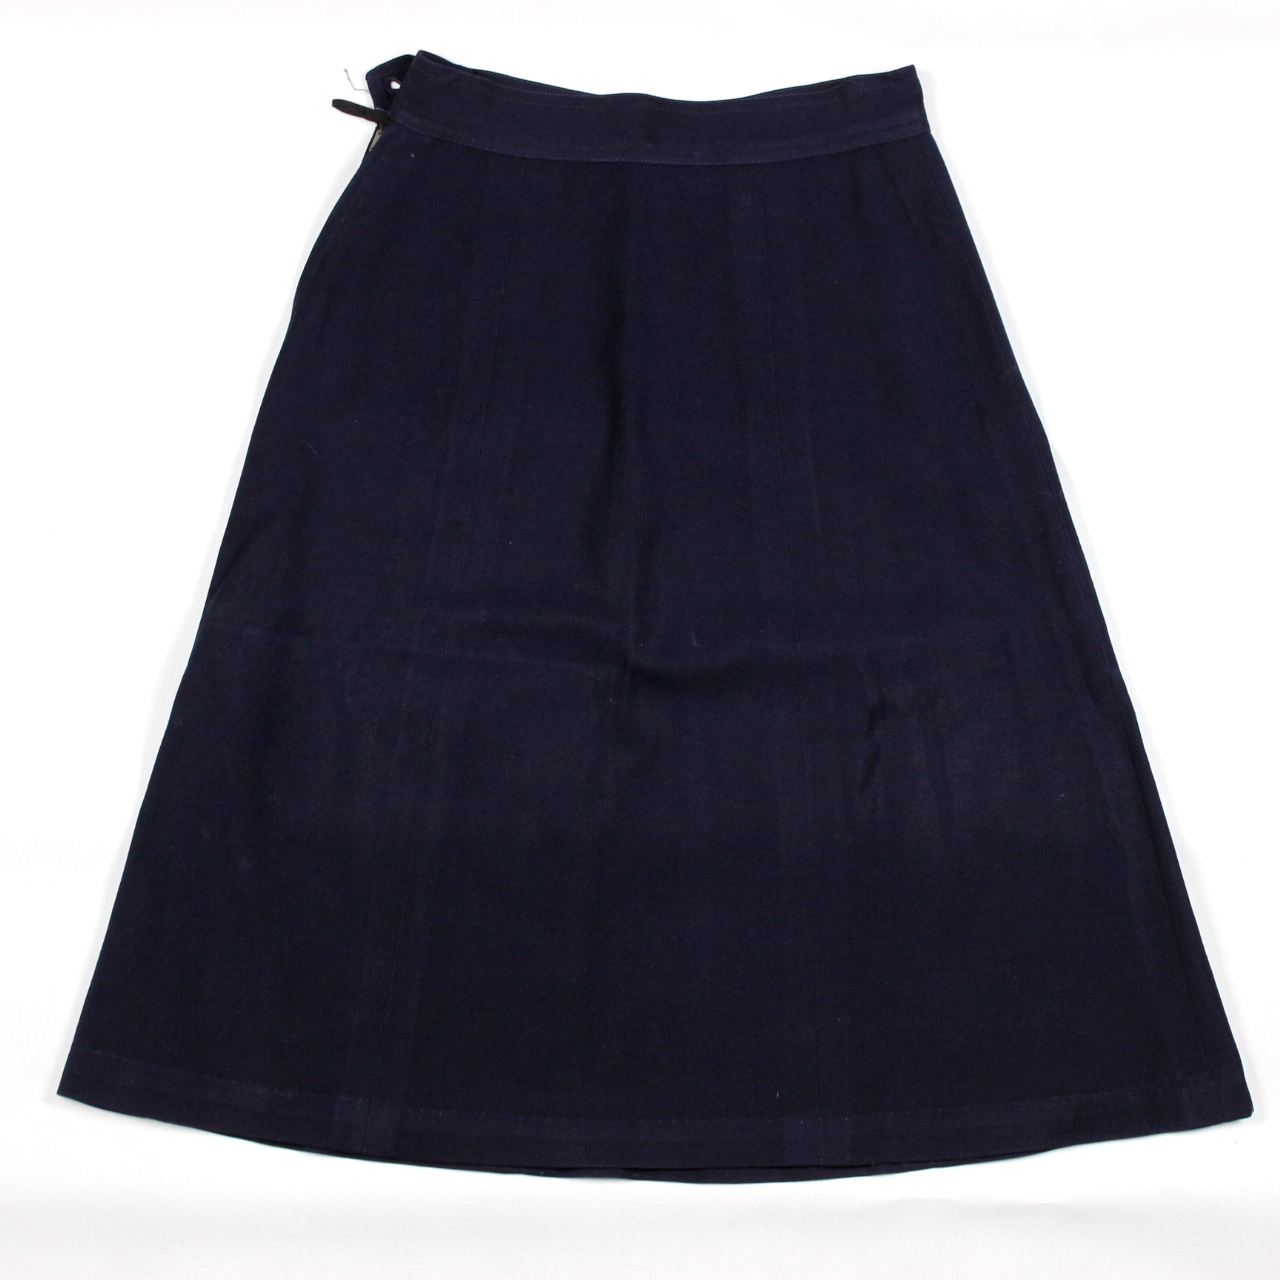 44th Collectors Avenue - US Navy WAVES blue dress skirt